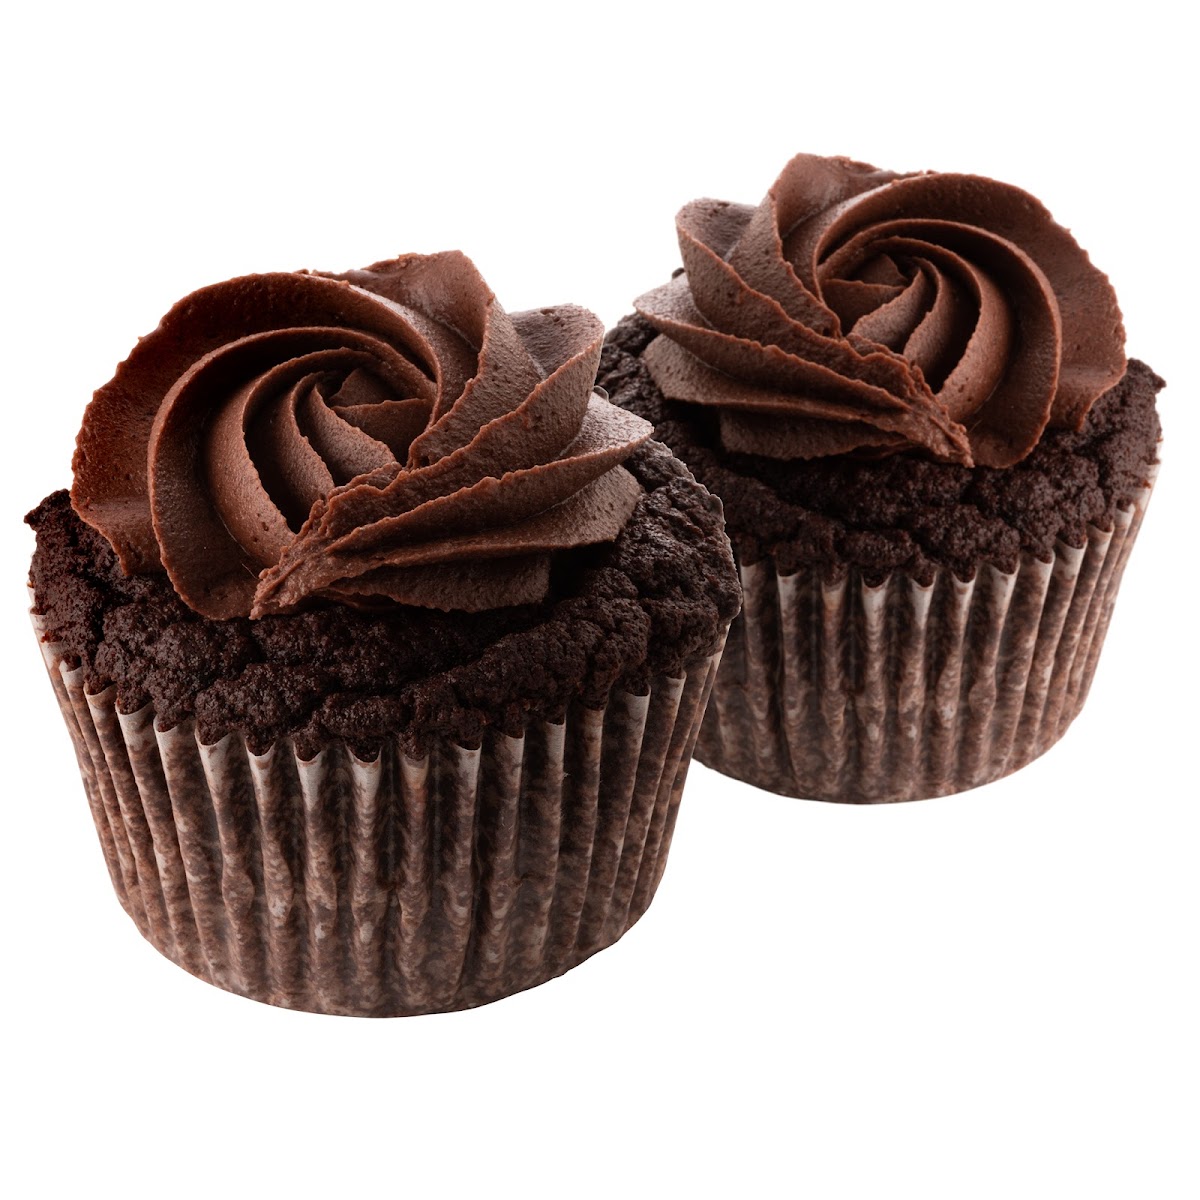 Sugar Free and Grain Free Chocolate Cupcakes with Sugar Free Chocolate Frosting